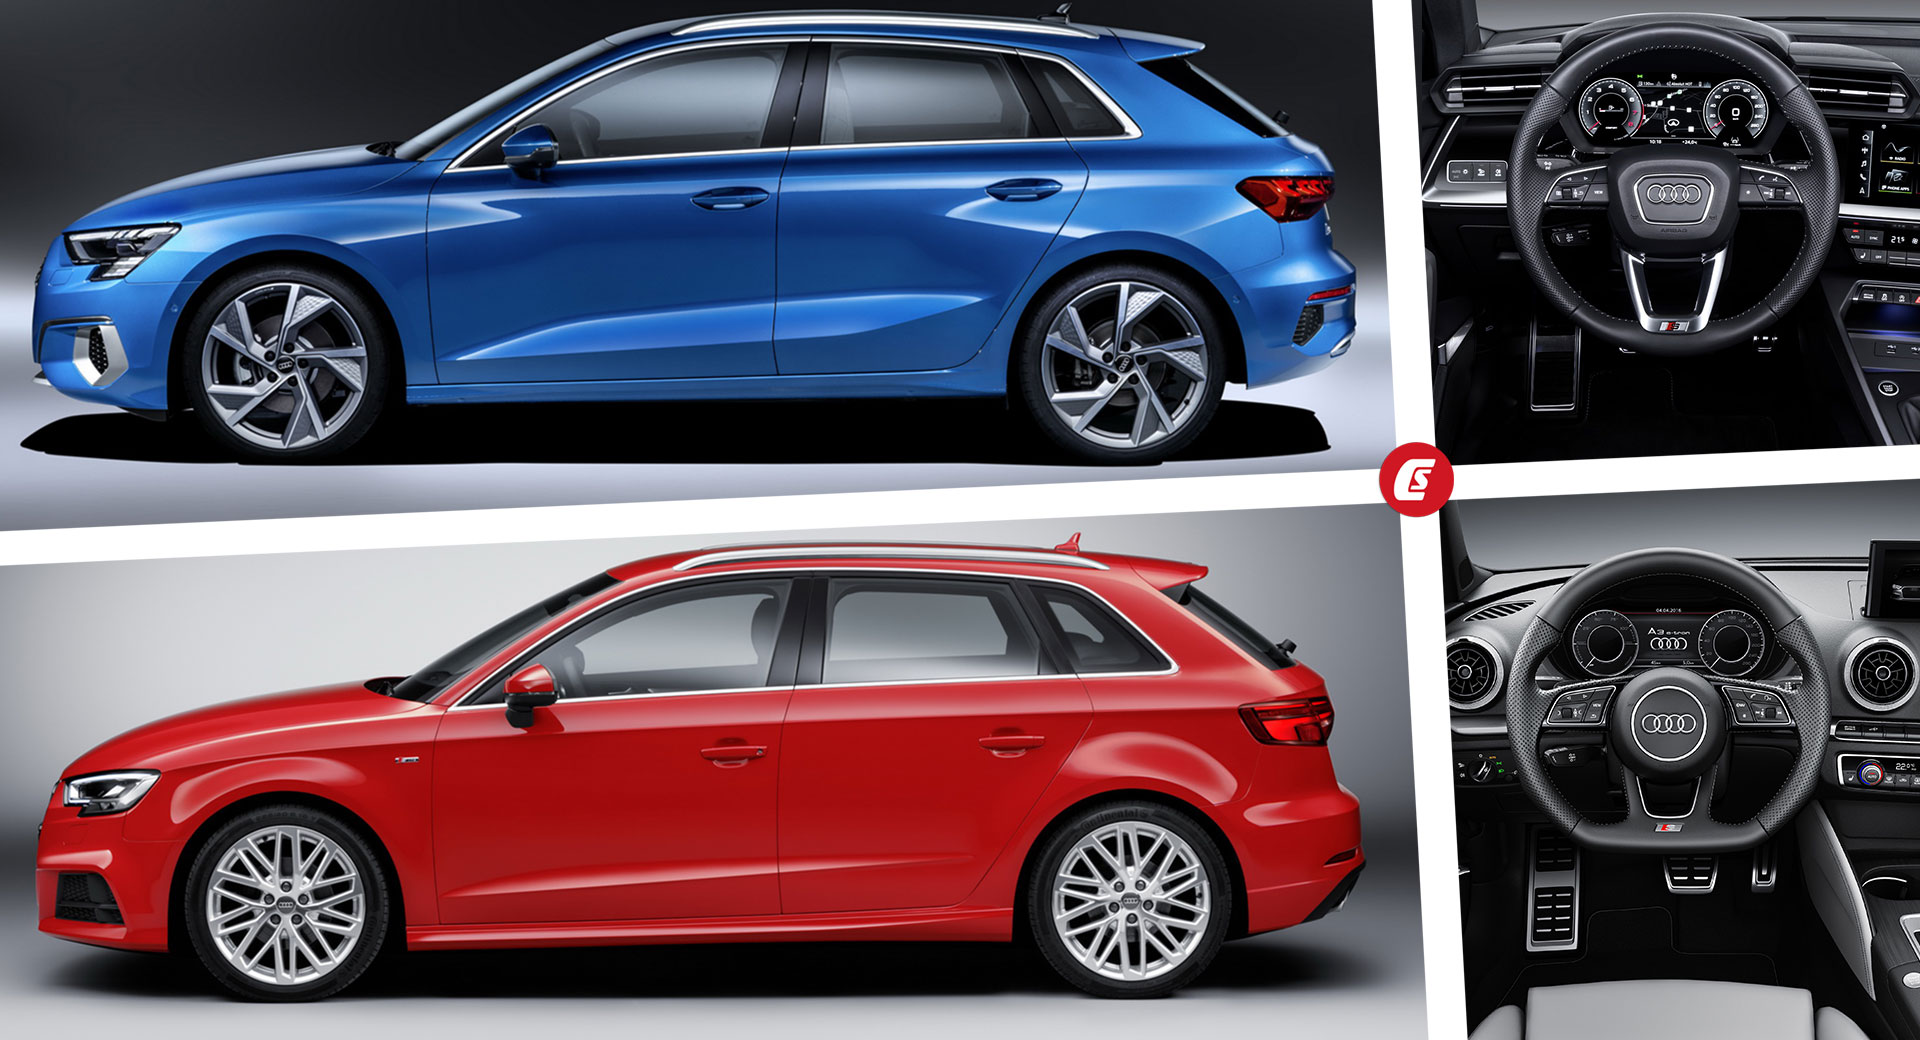 Moeras Worden Herhaal How Does The All-New Audi A3 Sportback Compare To Its Predecessor? |  Carscoops